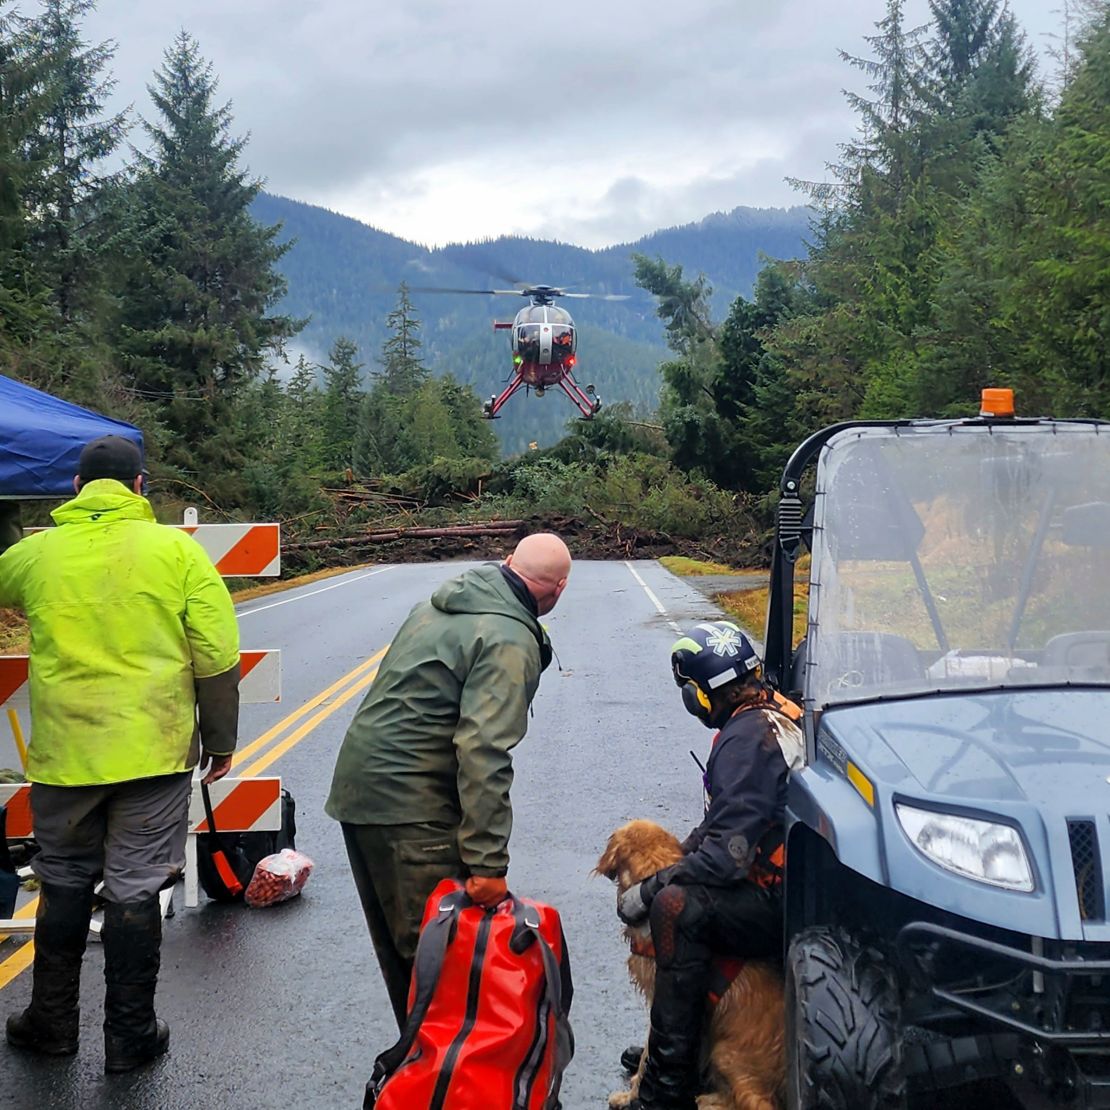 This photo provided by Division of Homeland Security and Emergency Management shows a helicopter arriving near mile 11 of the Zimovia Highway where ground teams, including search and rescue dogs, are actively working to search areas that state geologists have determined safe for entry Wednesday, Nov. 22, 2023, in Wrangell, Alaska, following a massive landslide earlier in the week. Three people have died and searchers looked Wednesday for three others who remain missing after a landslide ripped through a remote Alaska fishing community on Monday, Nov. 20, 2023. (Willis Walunga/Division of Homeland Security and Emergency Management via AP)